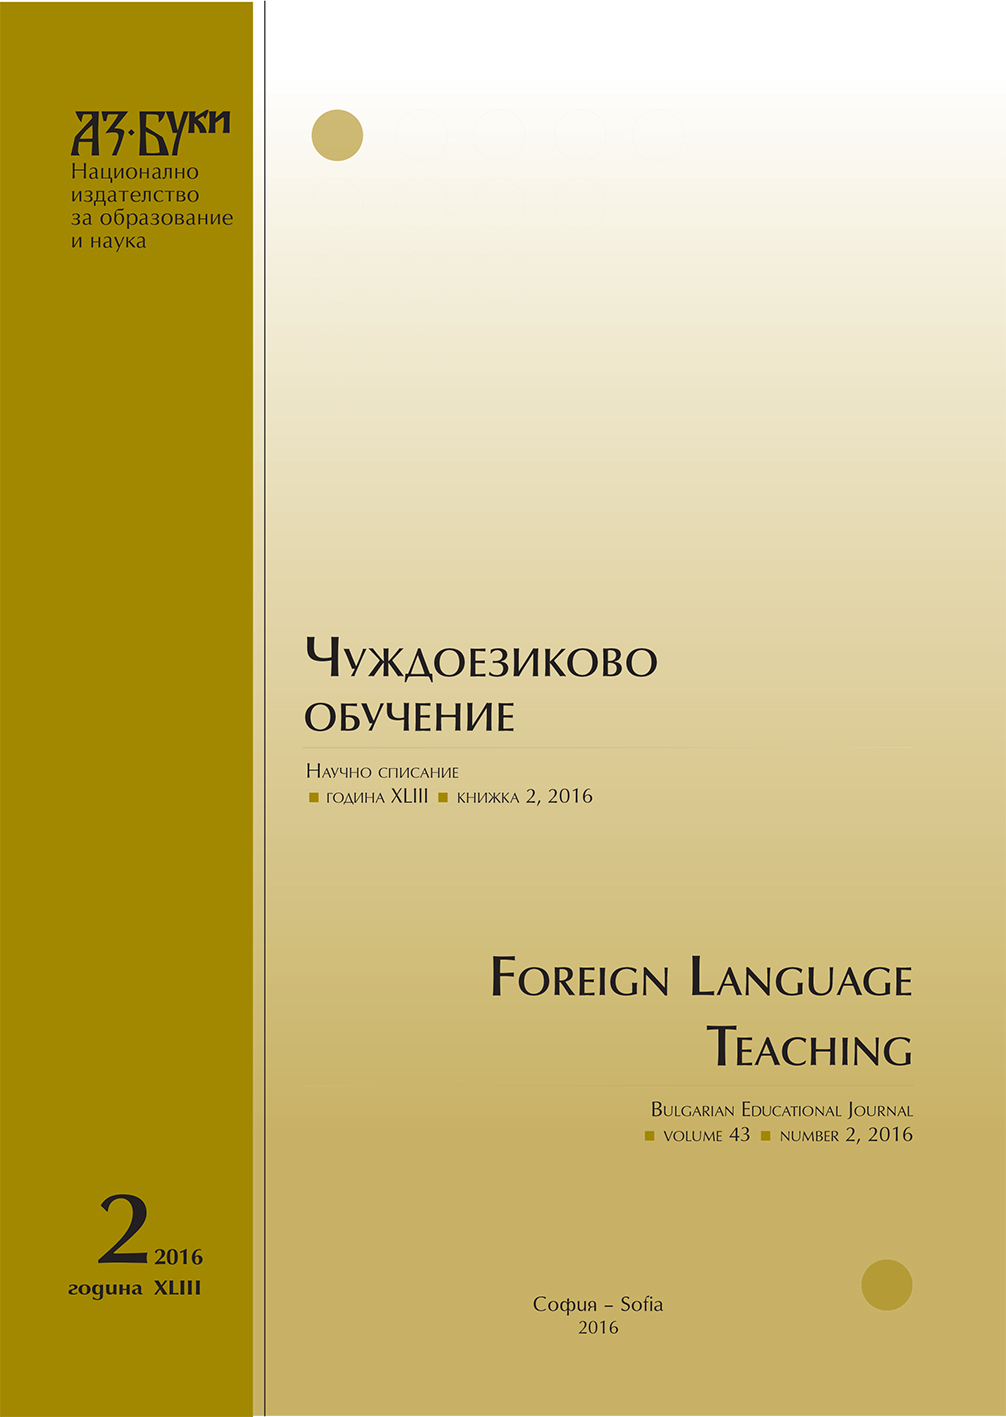 Concept as
Linguodidactic Category Cover Image